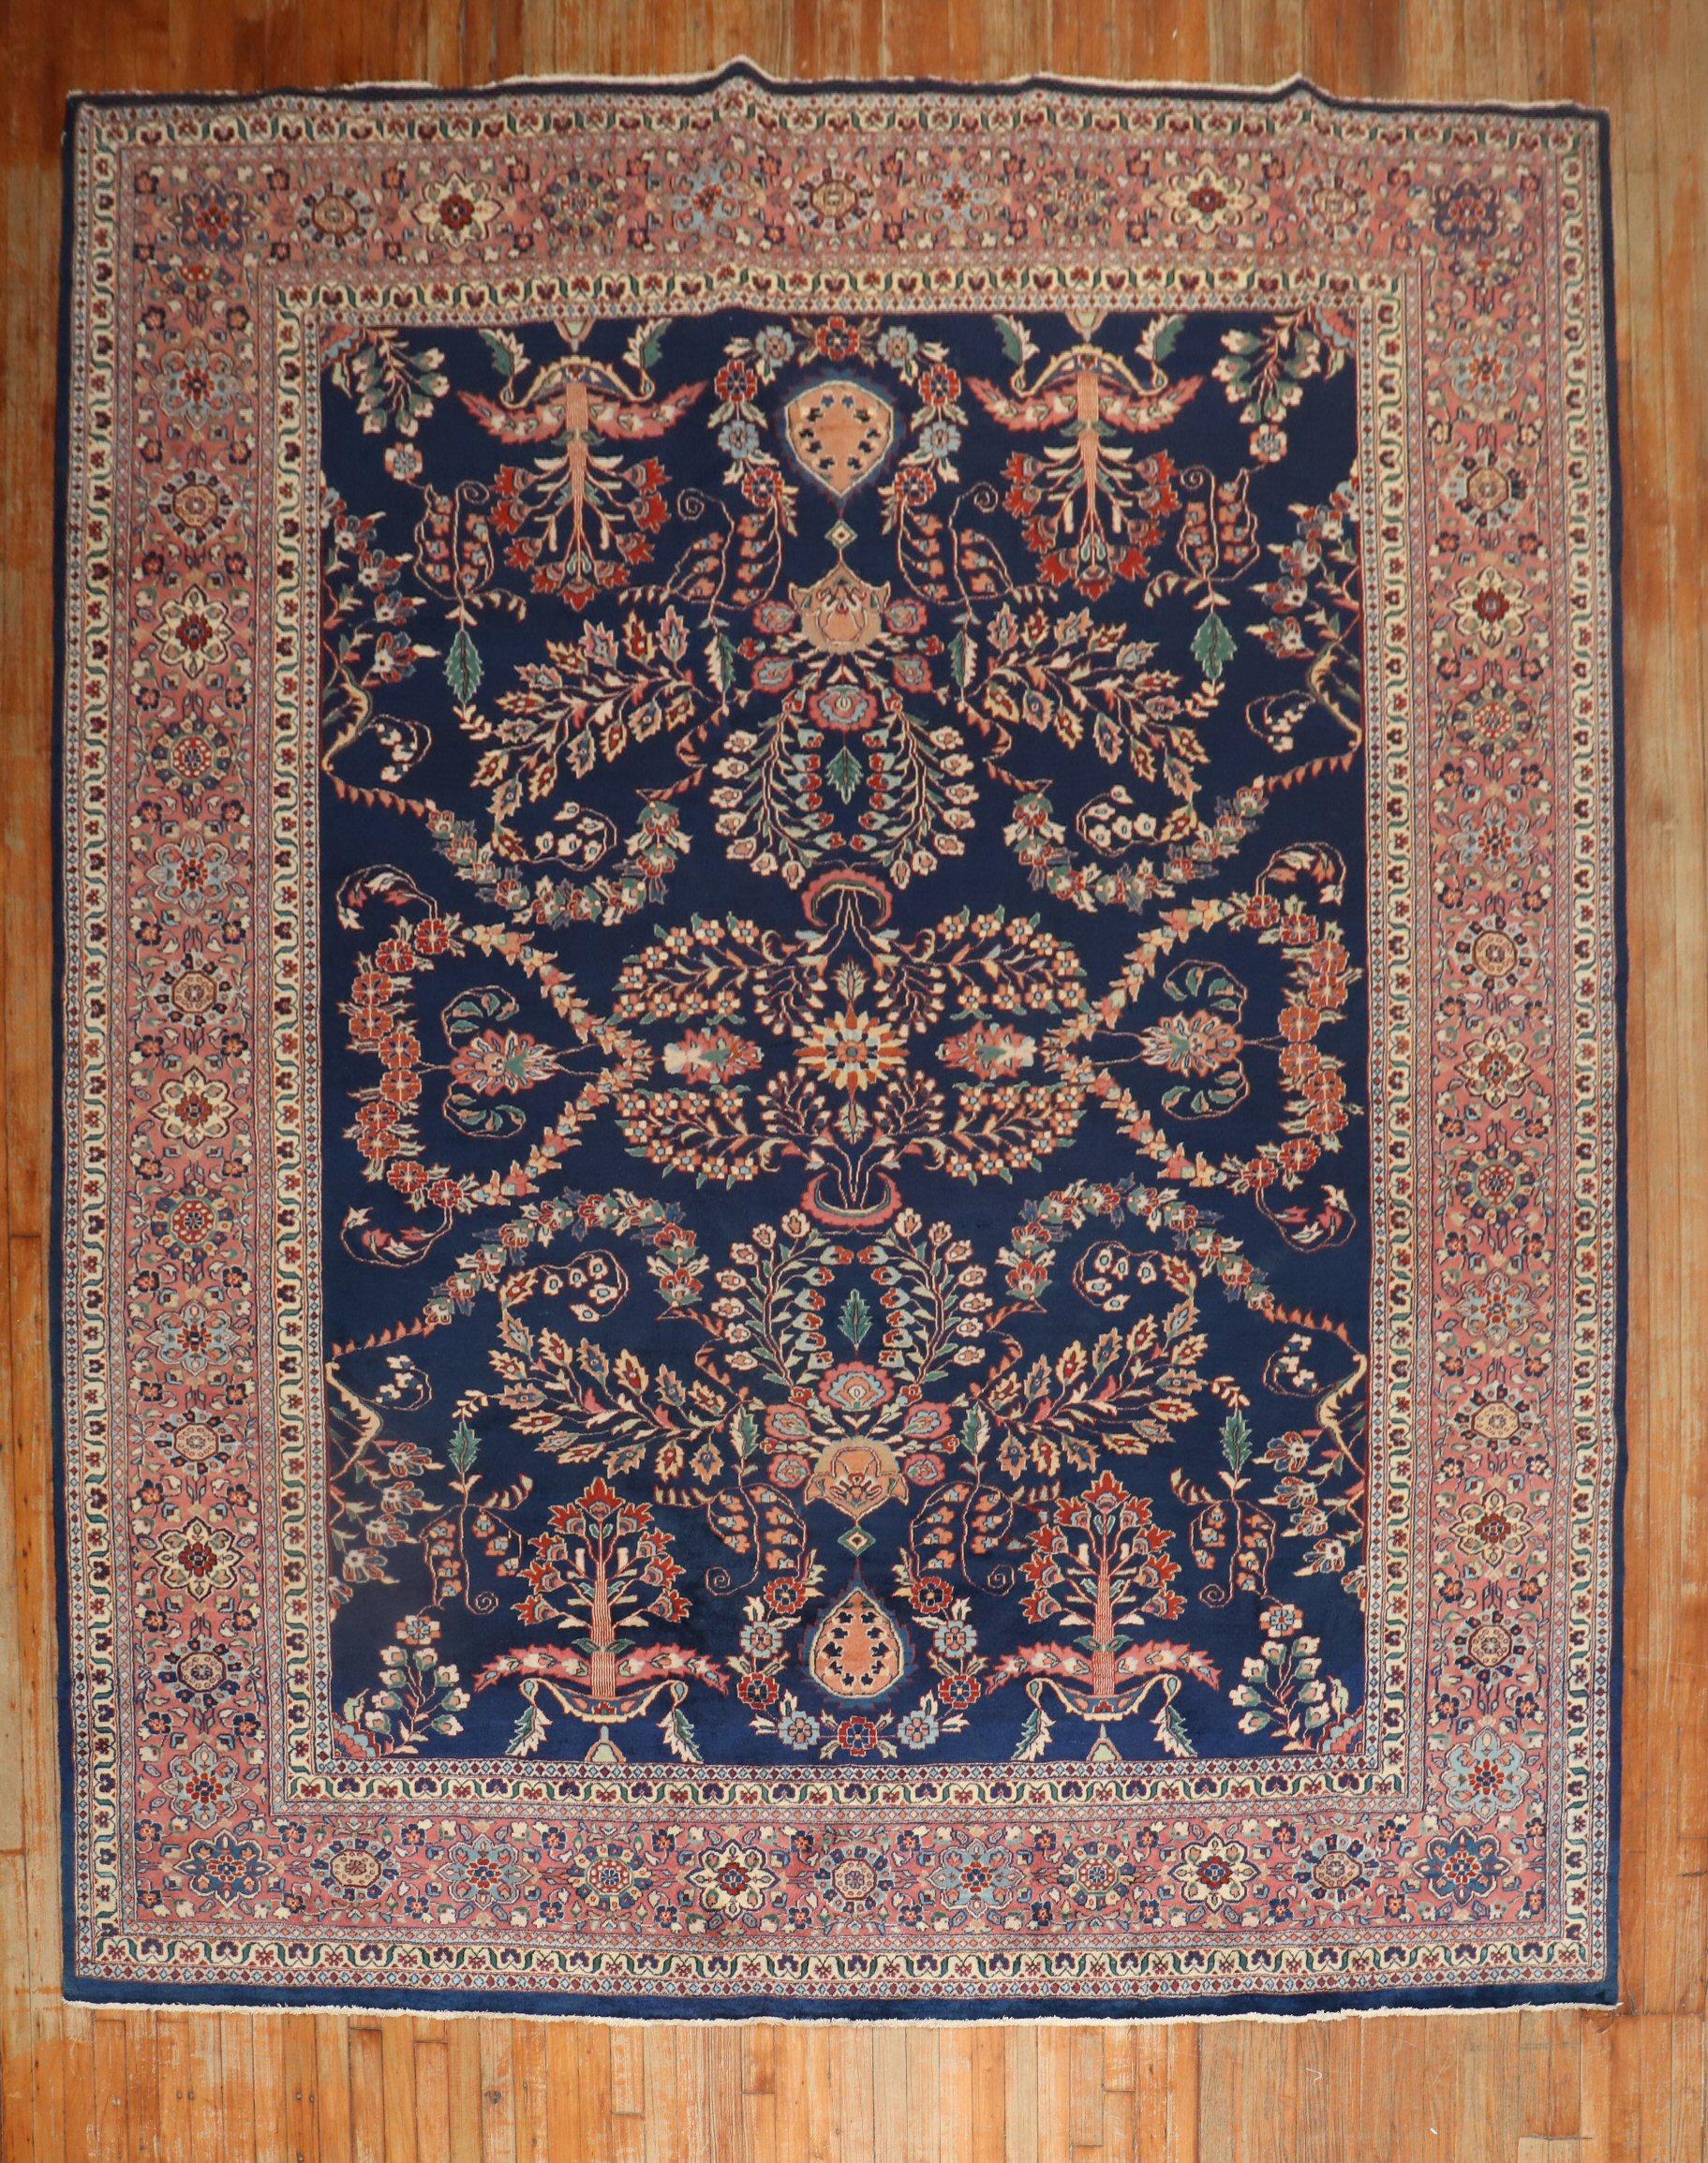 An authentic 3rd quarter of the 20th-century Persian Sarouk rug with a floral design on a navy ground.

Measures: 9'1